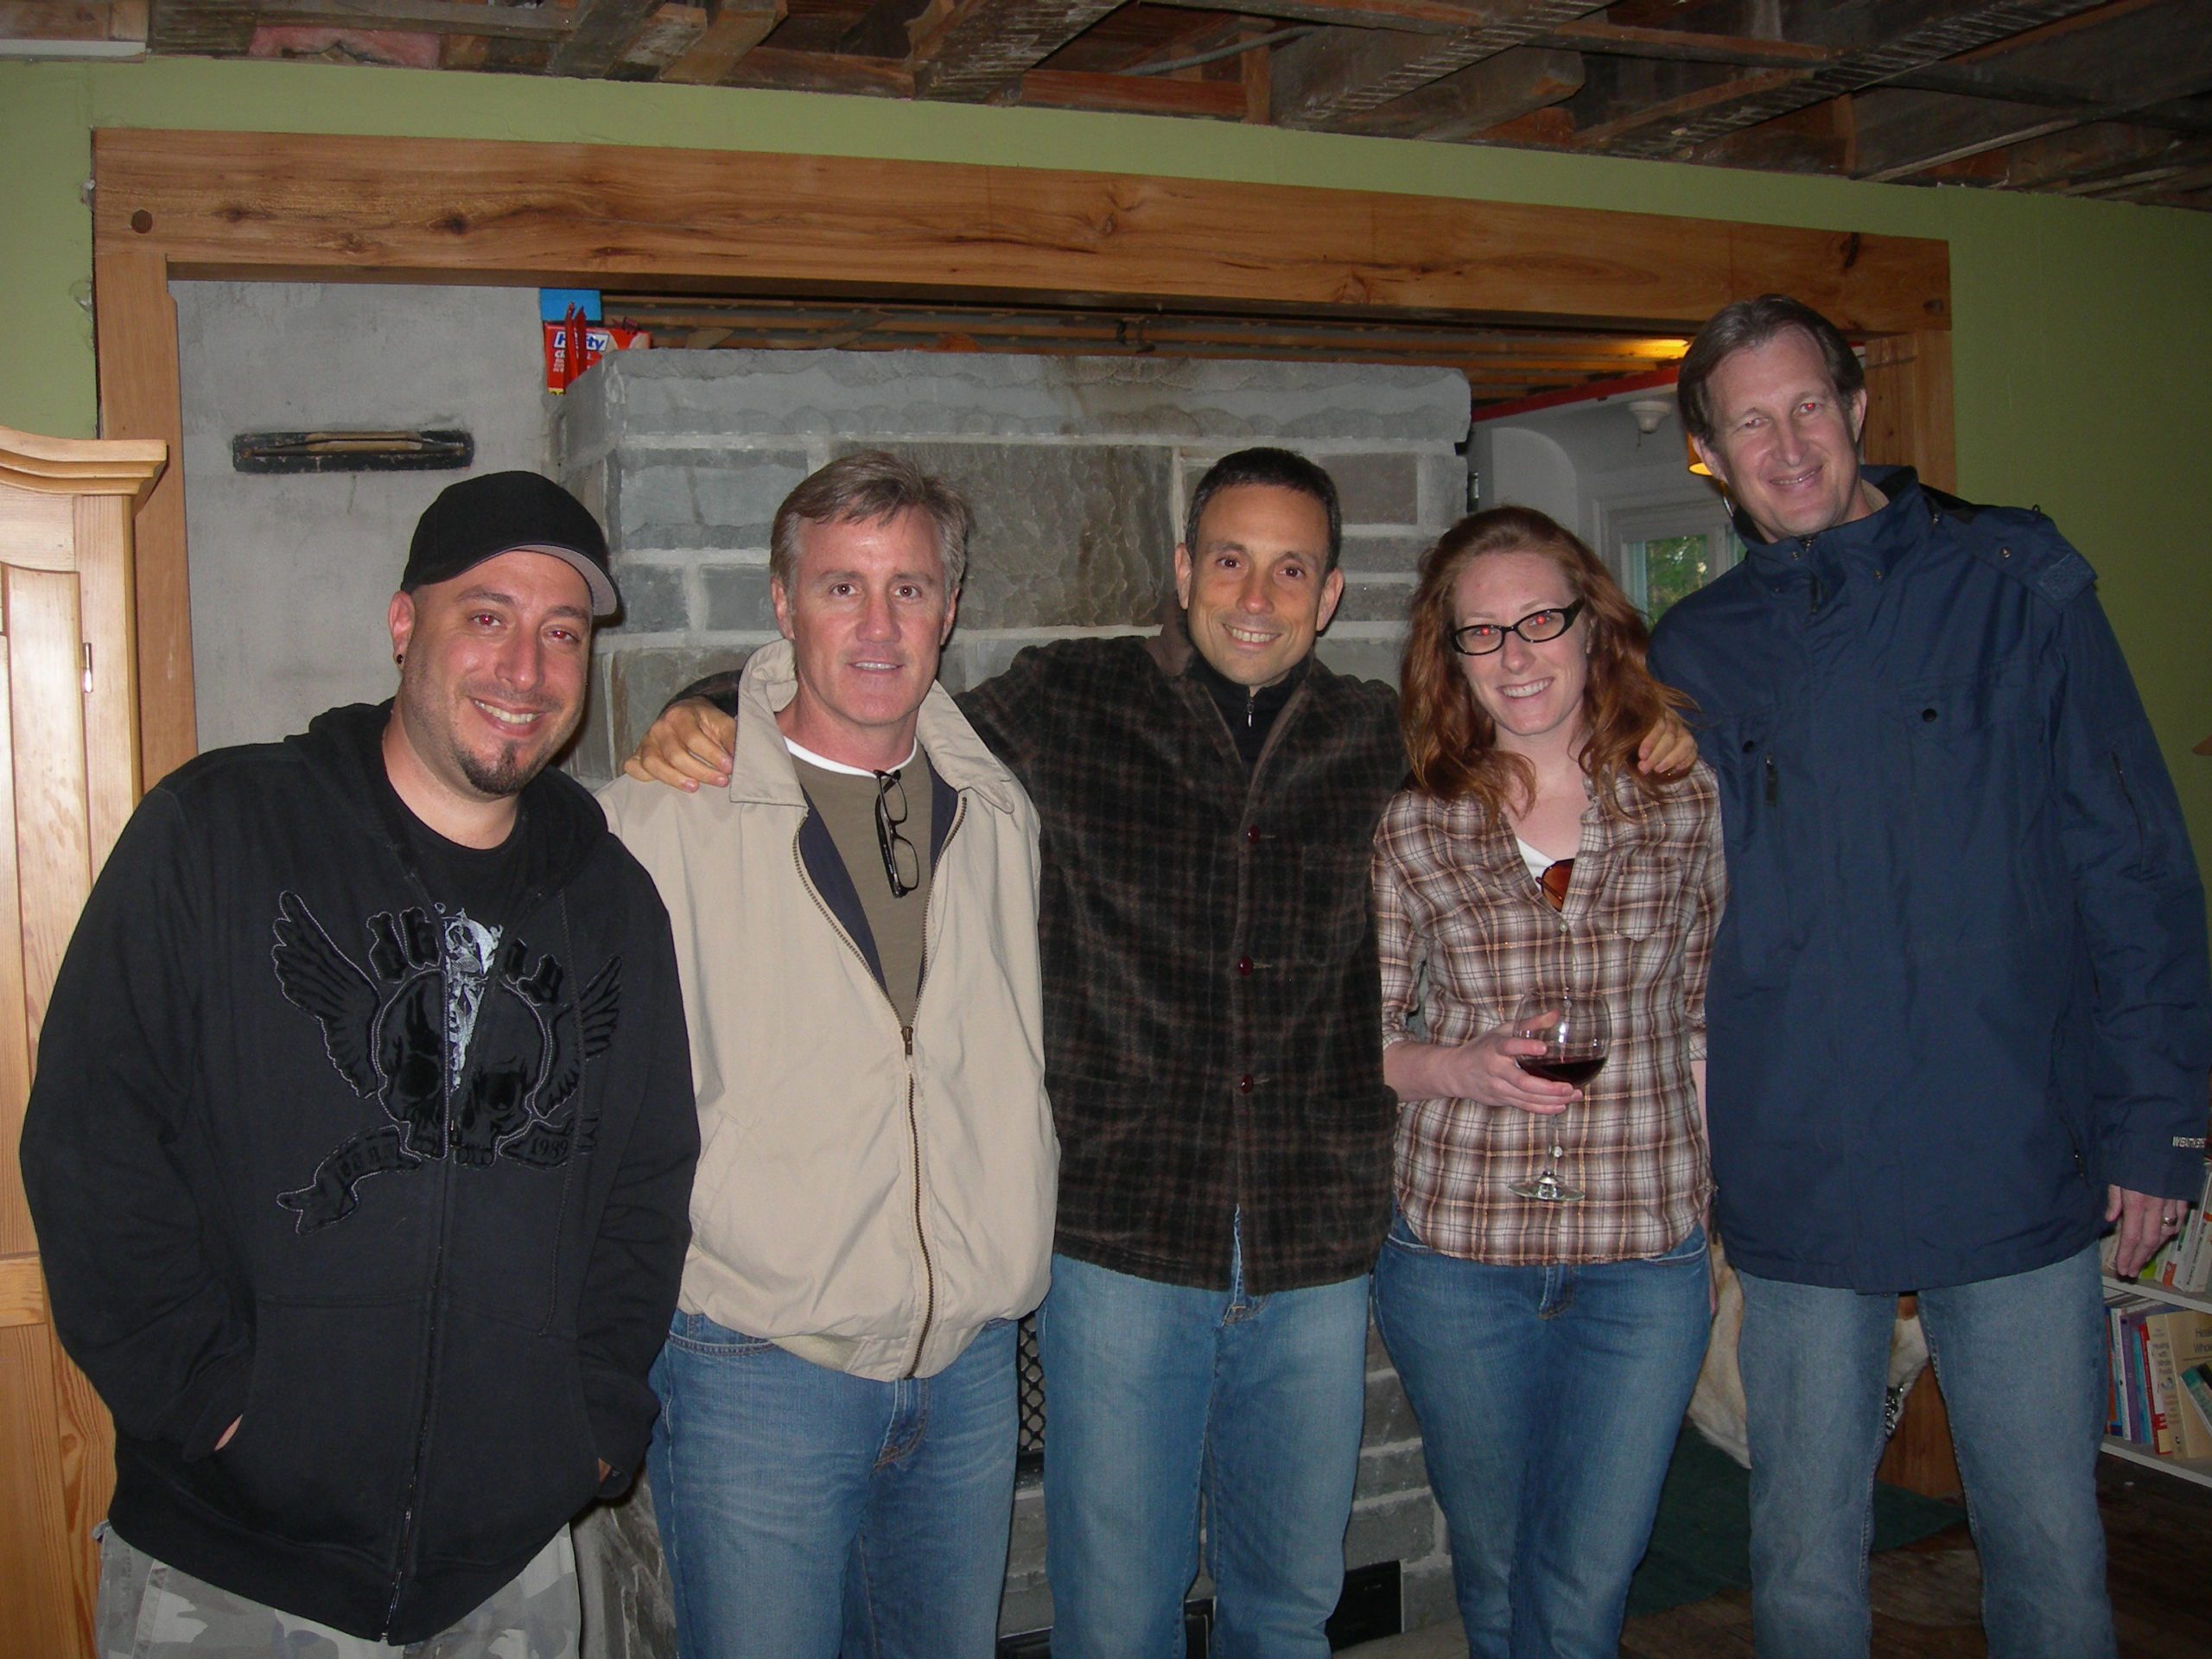 The core crew of the Forks Over Knives documentary film. (From left): John Orfanopoulos (camera, editing), producer John Corry, executive producer Brian Wendel, co-producer Allison Boon, and writer/director Lee Fulkerson.